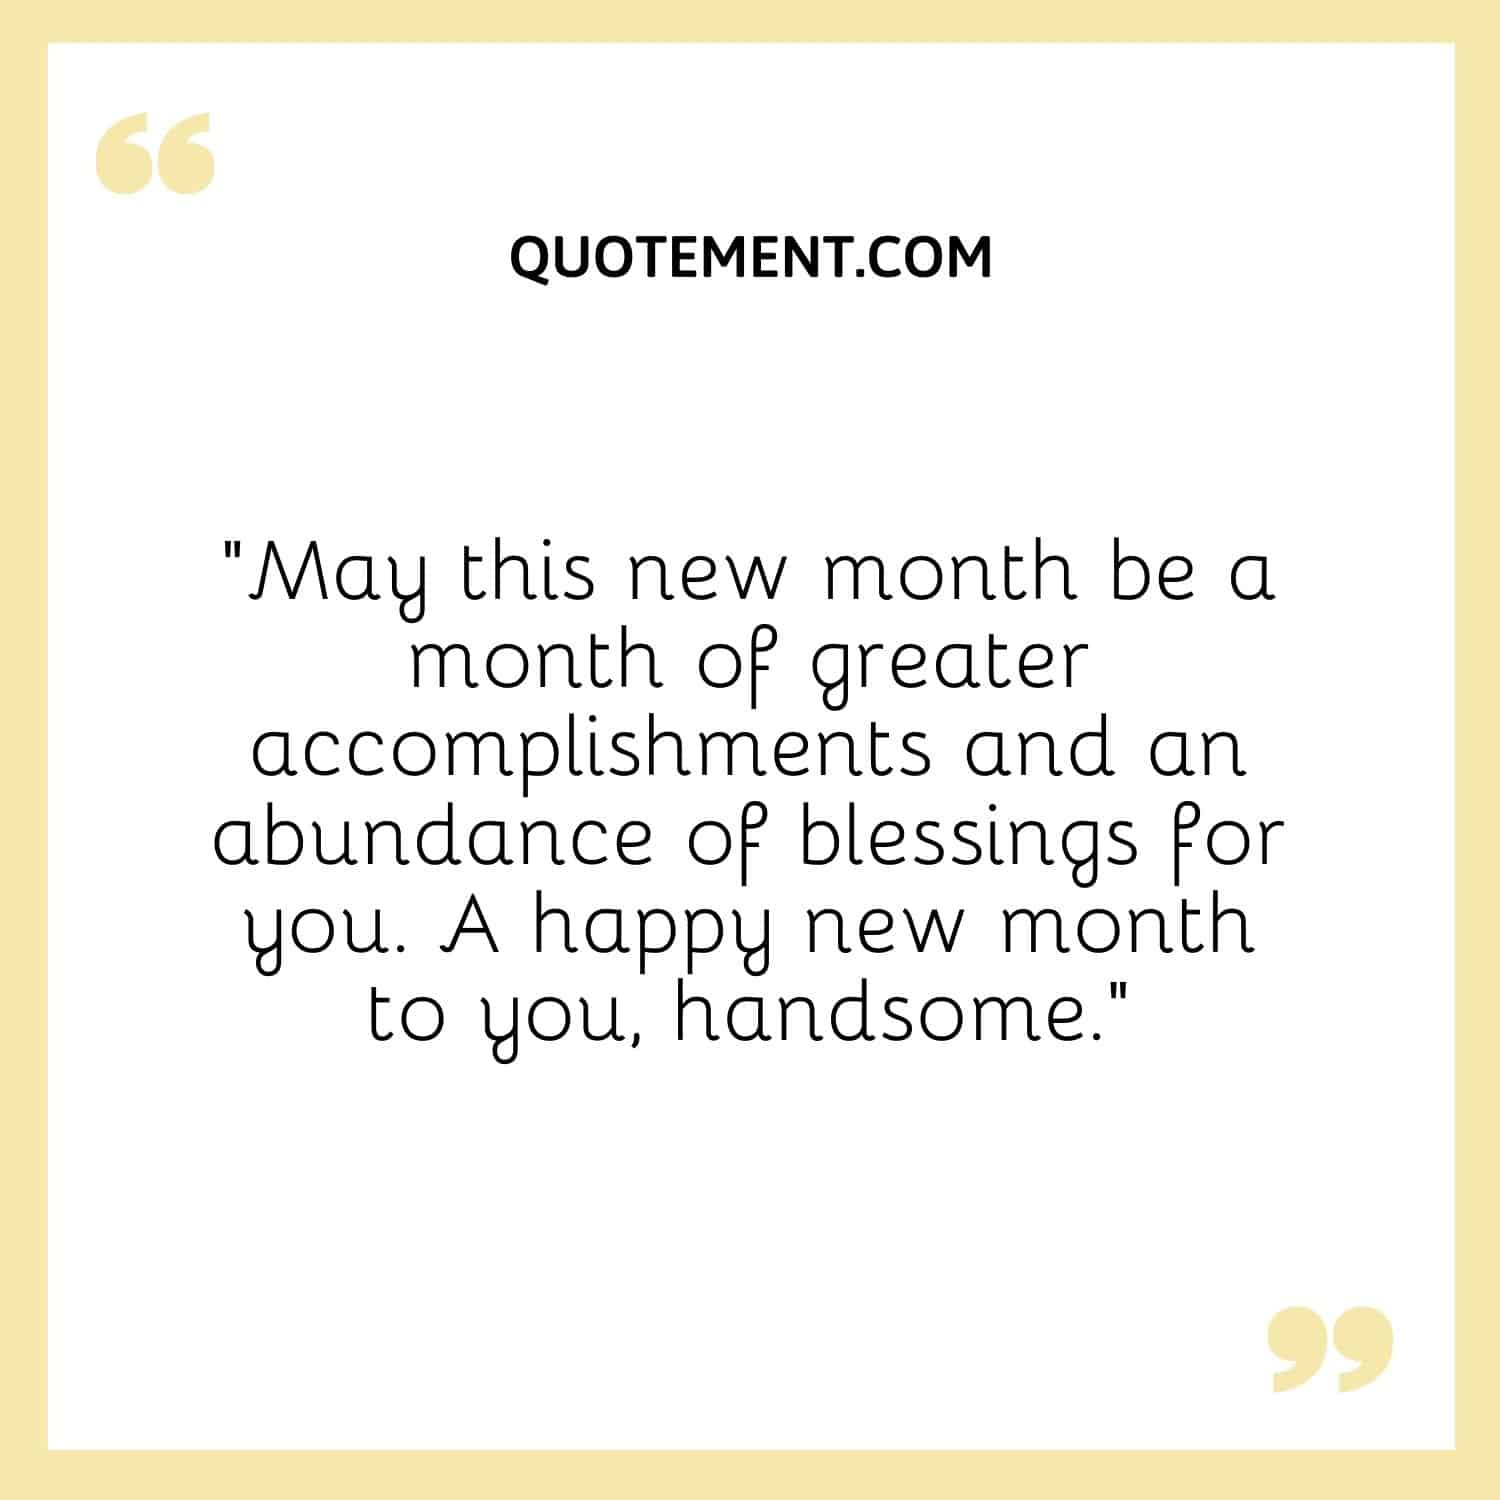 May this new month be a month of greater accomplishments and an abundance of blessings for you